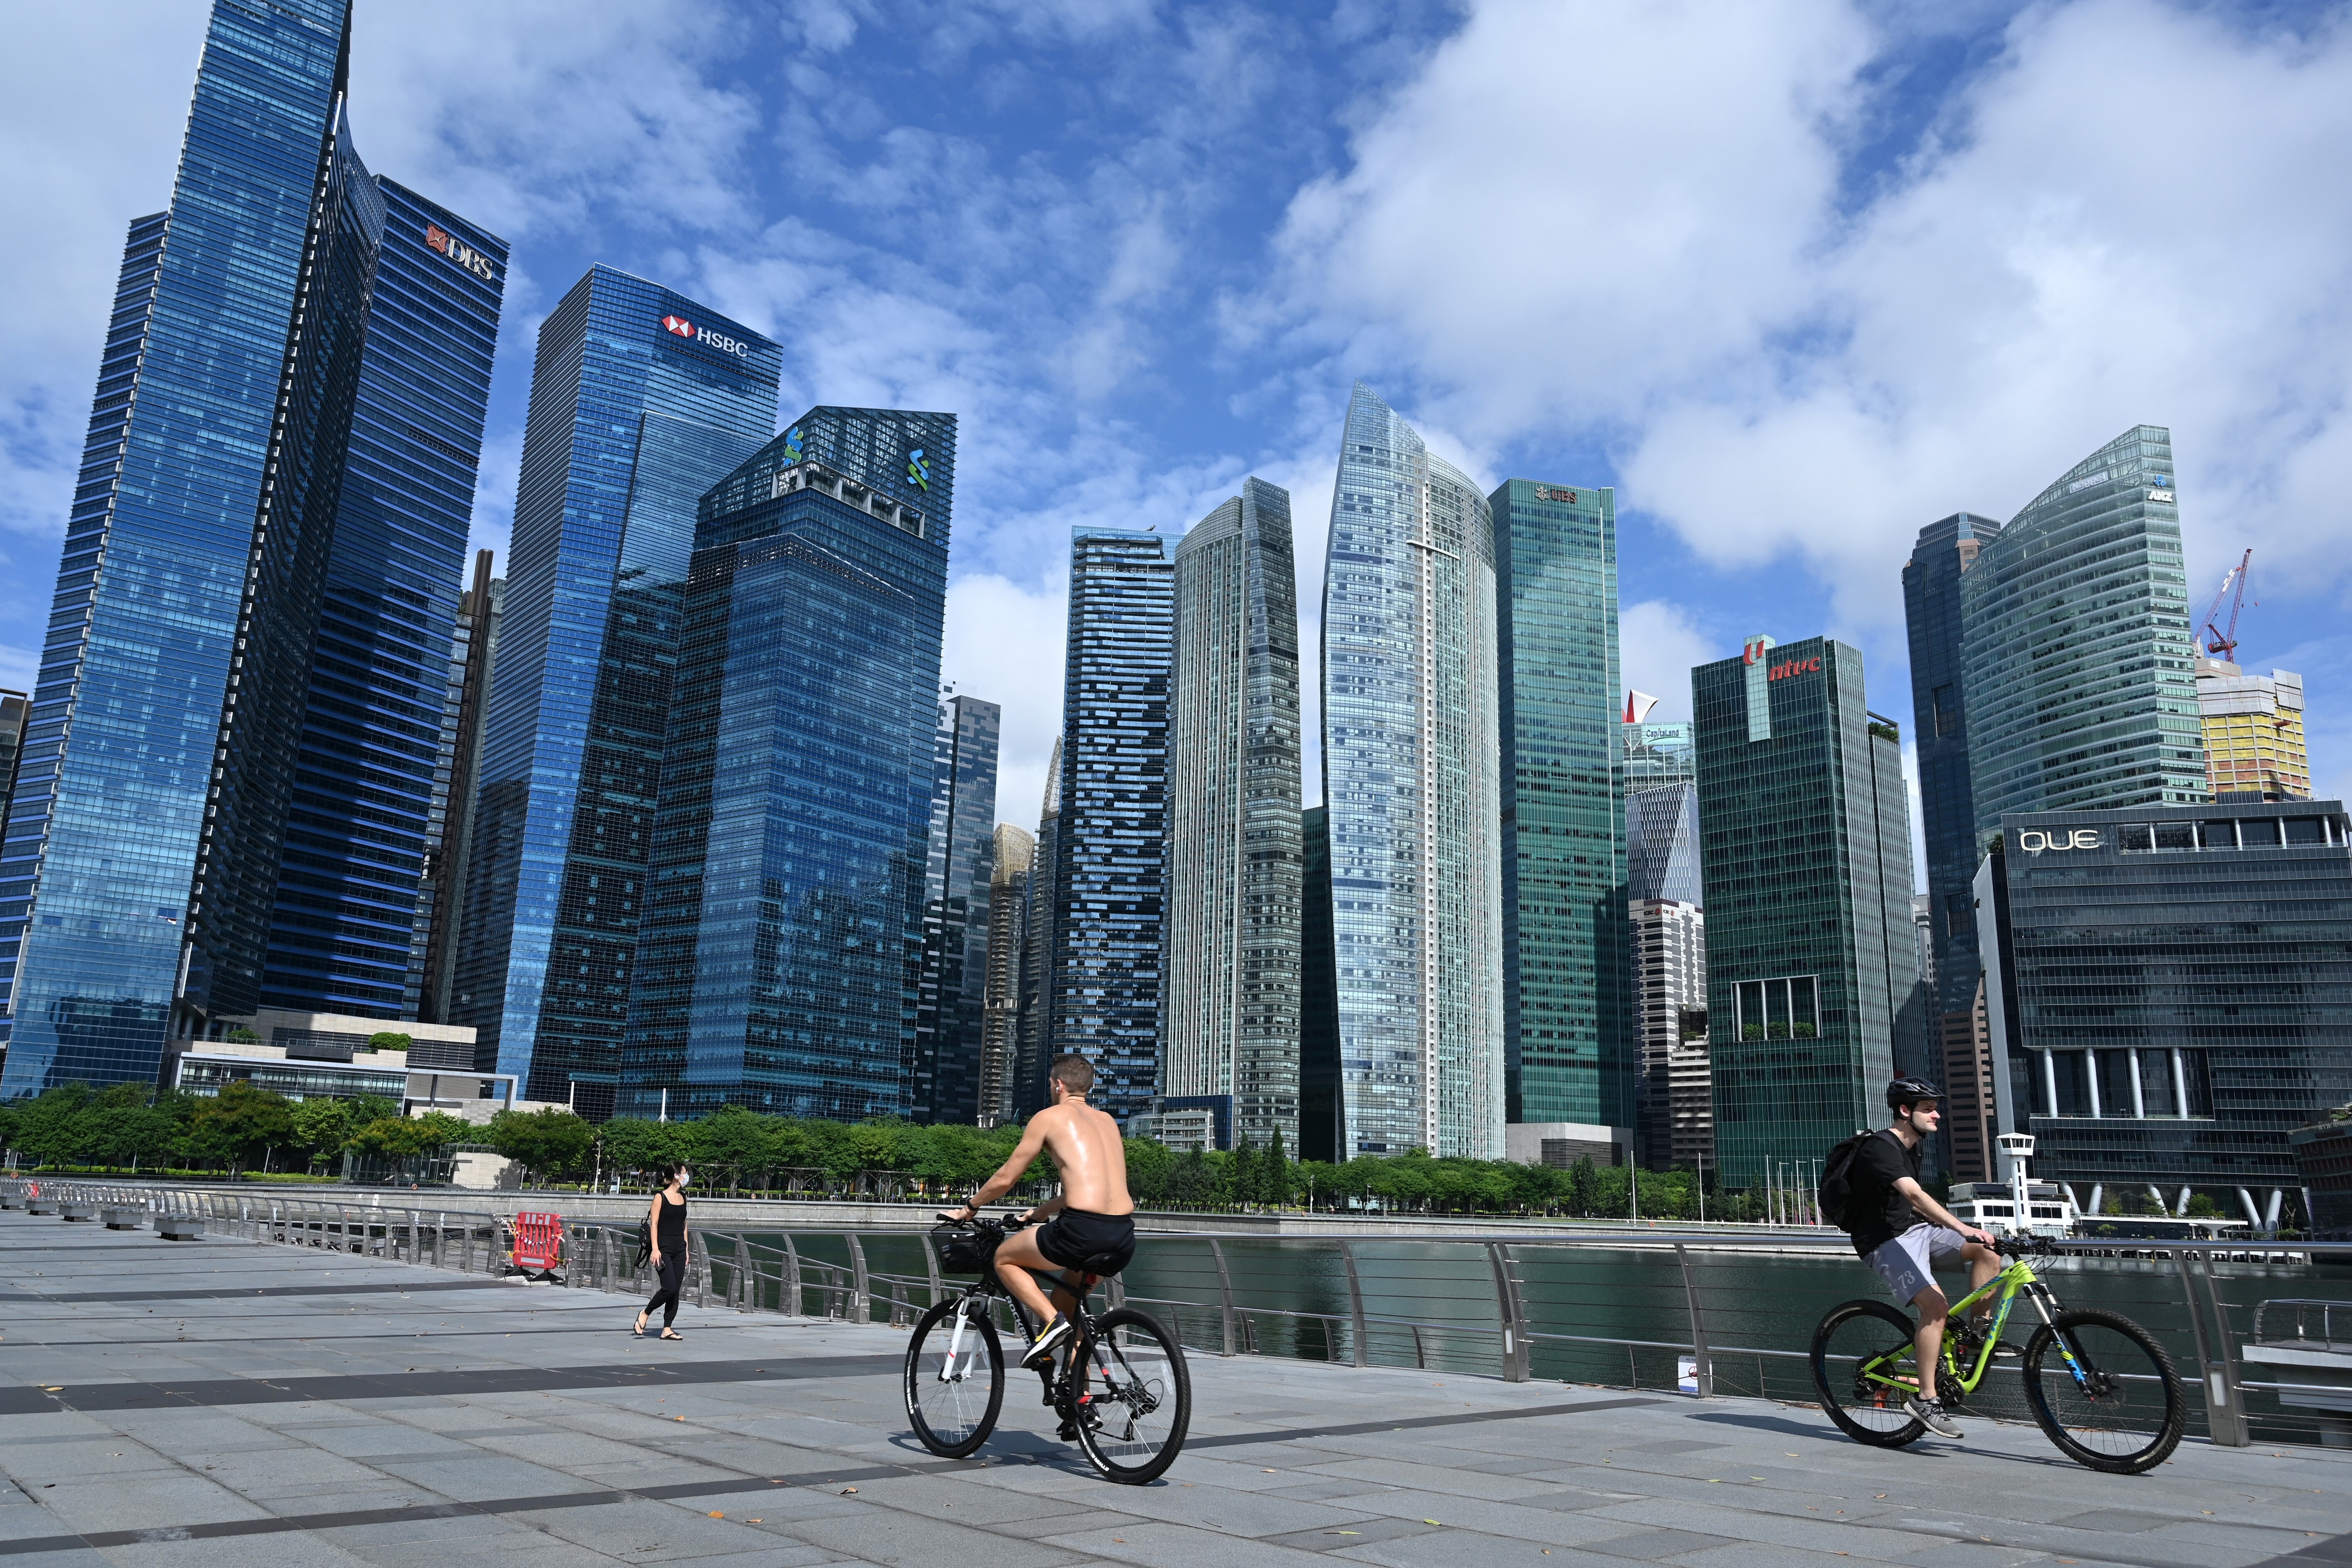 A combination of cheaper rents and the ‘tactile, communal’ draw of physical spaces has seen newer, nimbler firms succeed even as some older companies falter. Photo: AFP